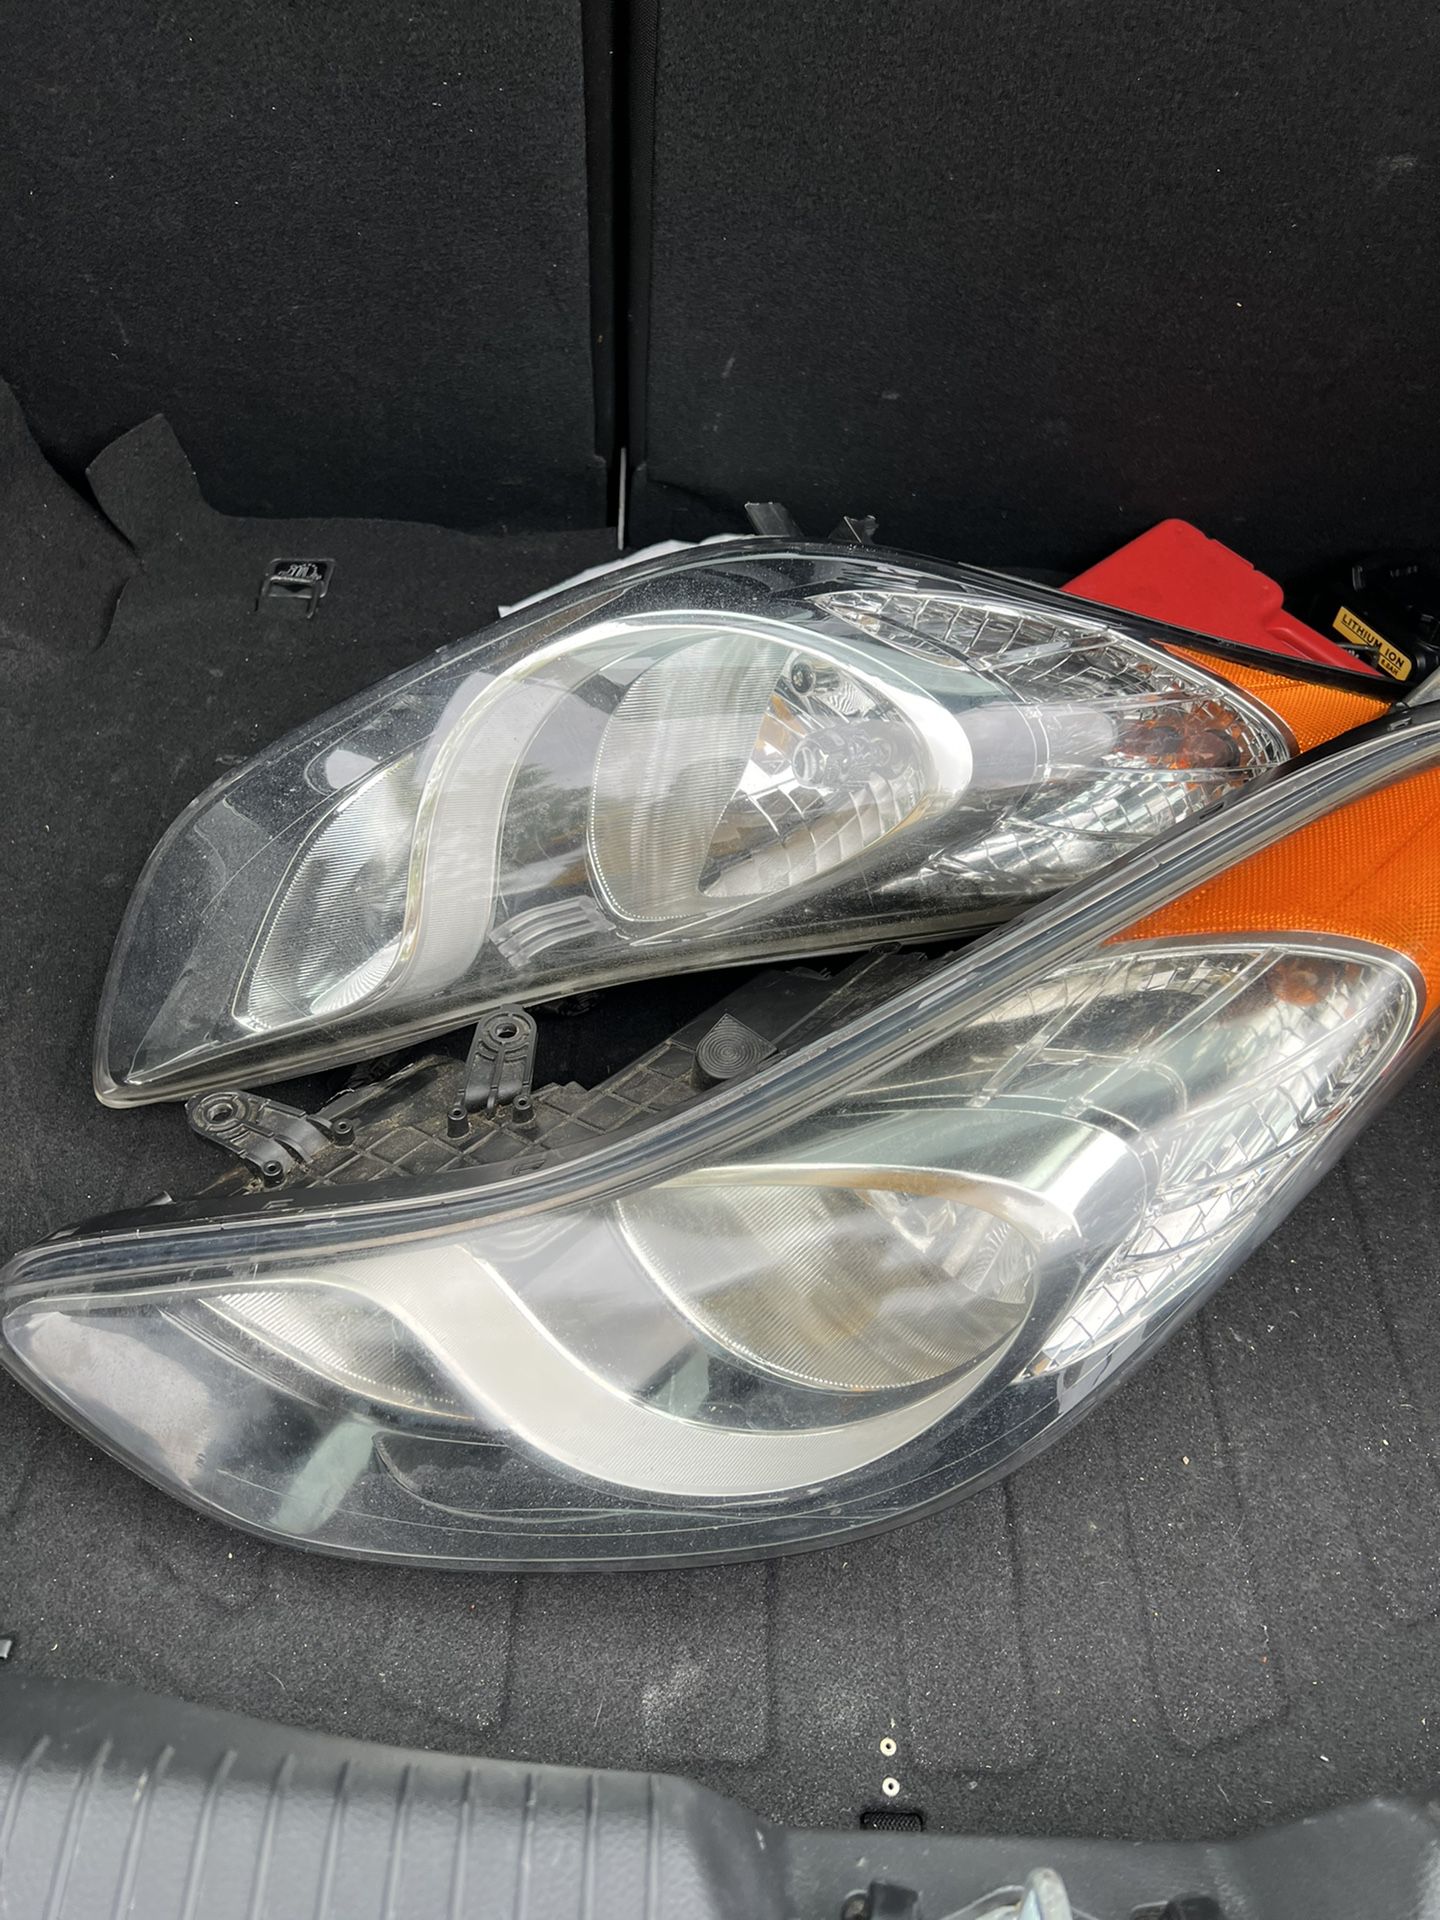 Hyundai Elentra 2012 Headlight Left  And Right Like New I Ordered By Mistake 